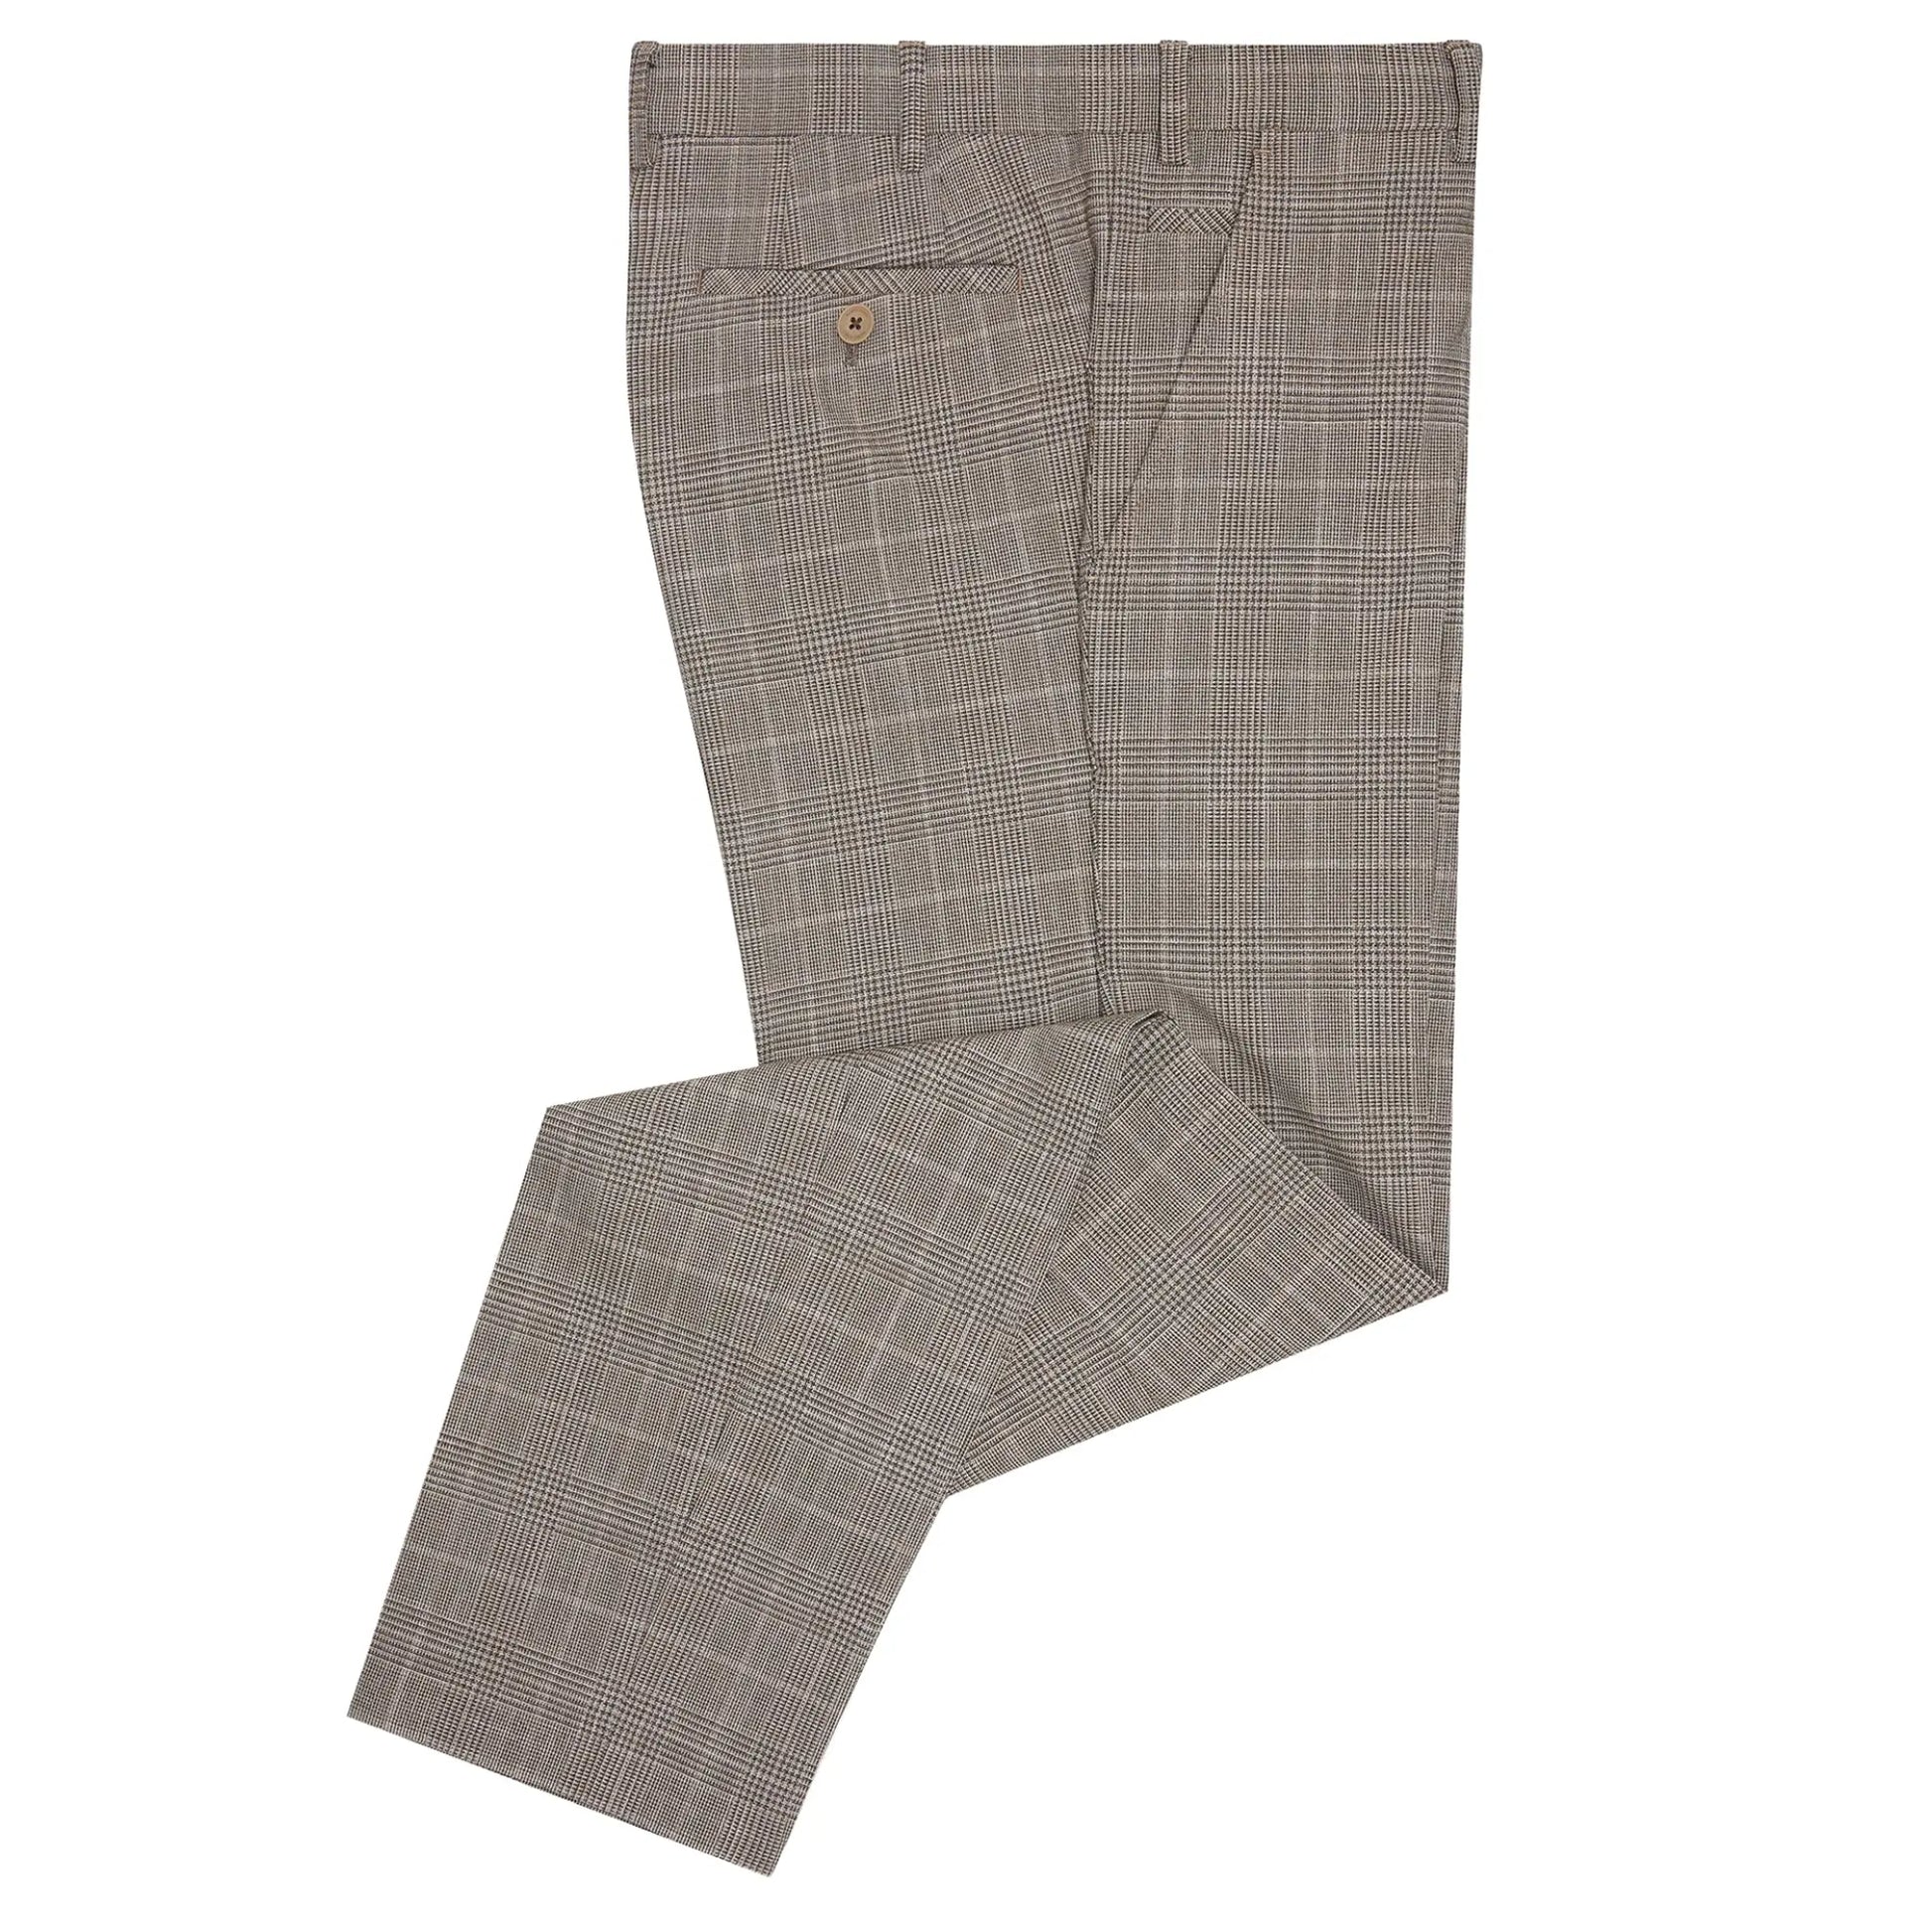 Buy Remus Uomo Matteo Prince of Wales Suit Trousers - Brown | Suit Trouserss at Woven Durham